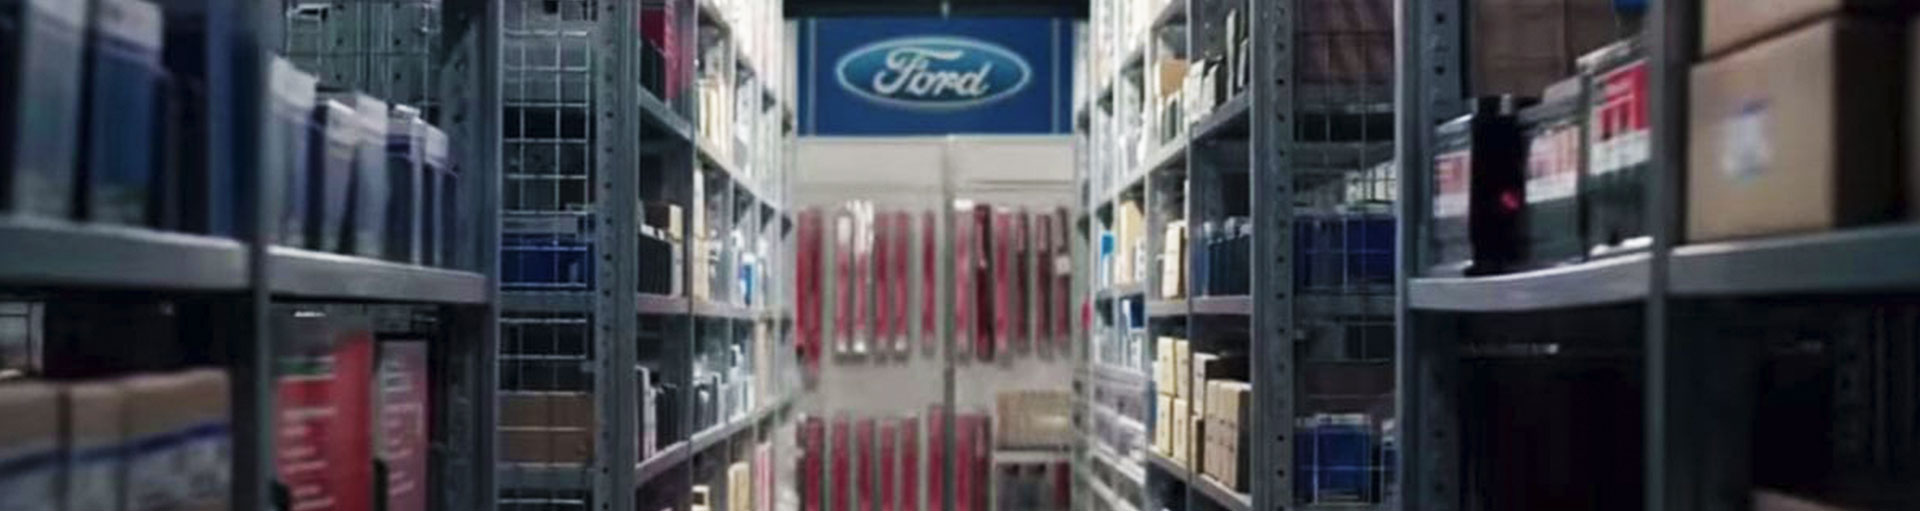 Ford Parts Department